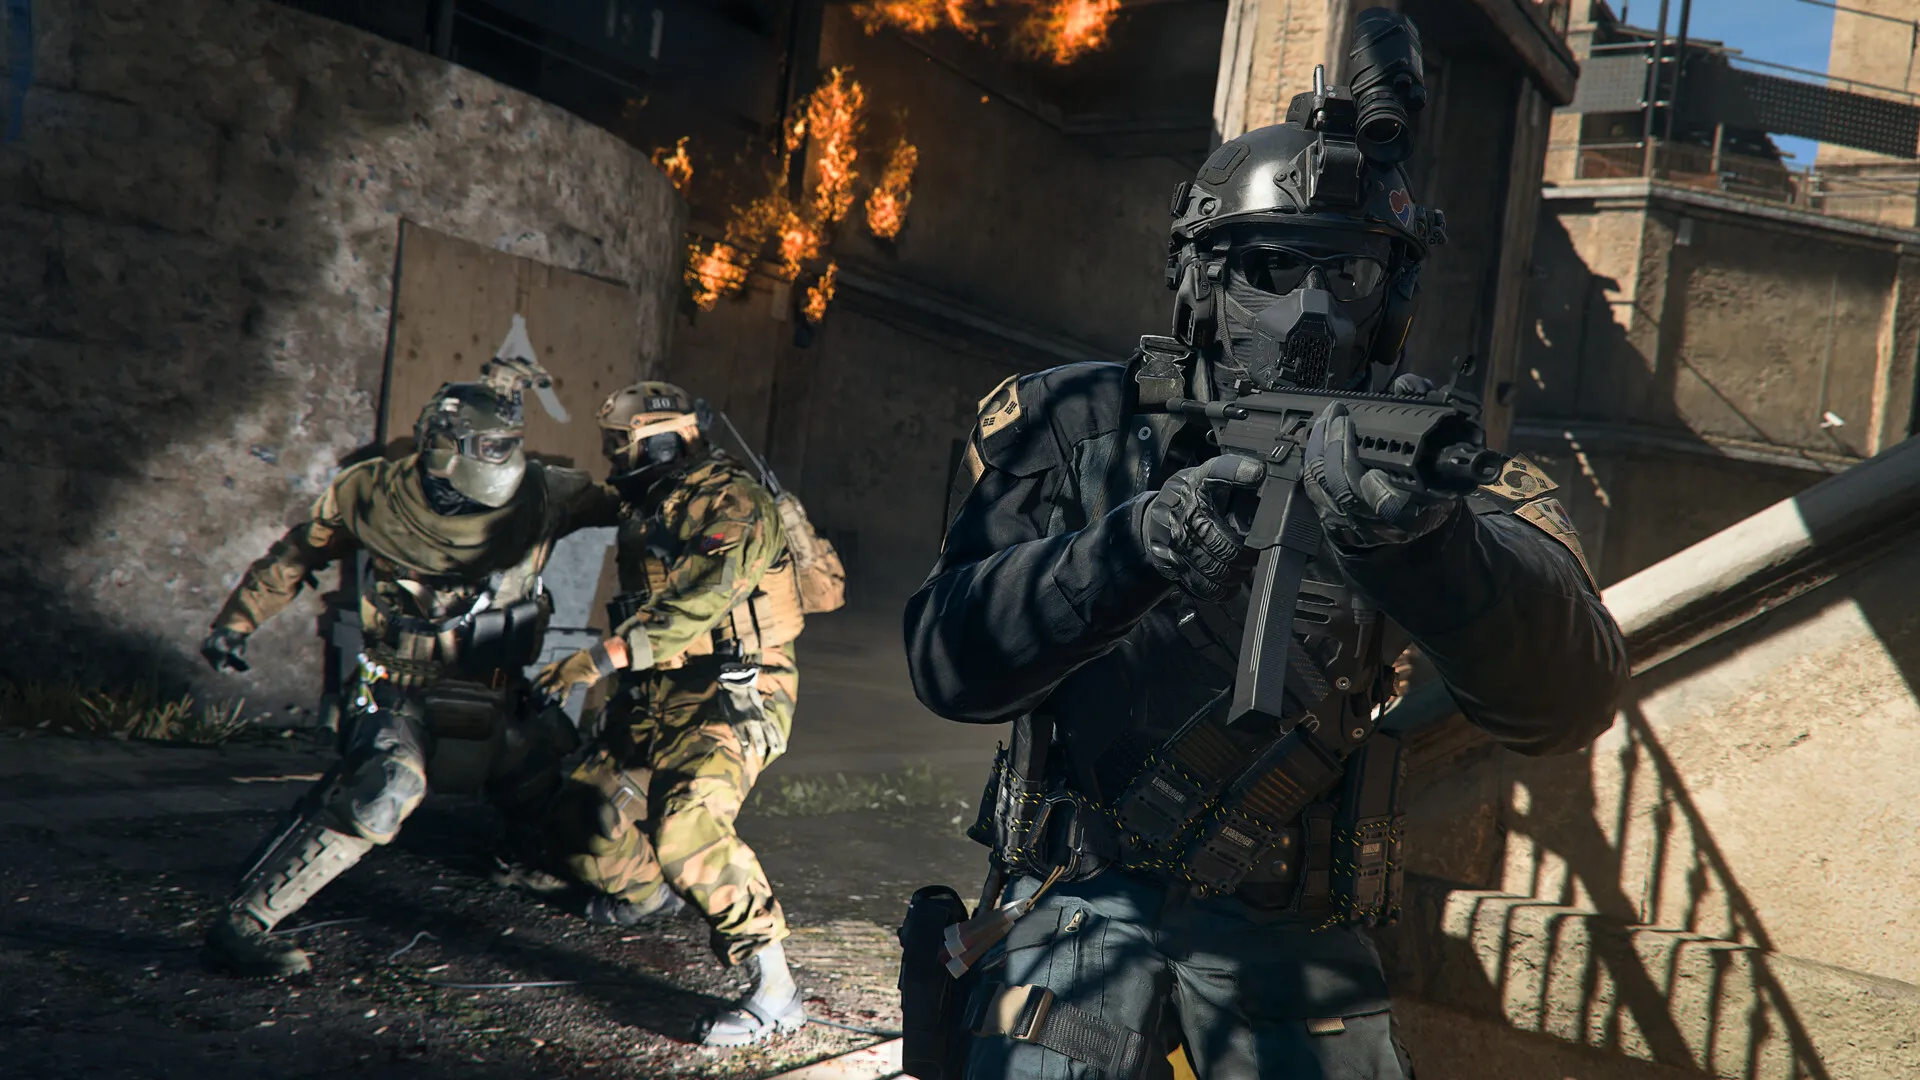 Call of Duty: Modern Warfare Warzone System Requirements